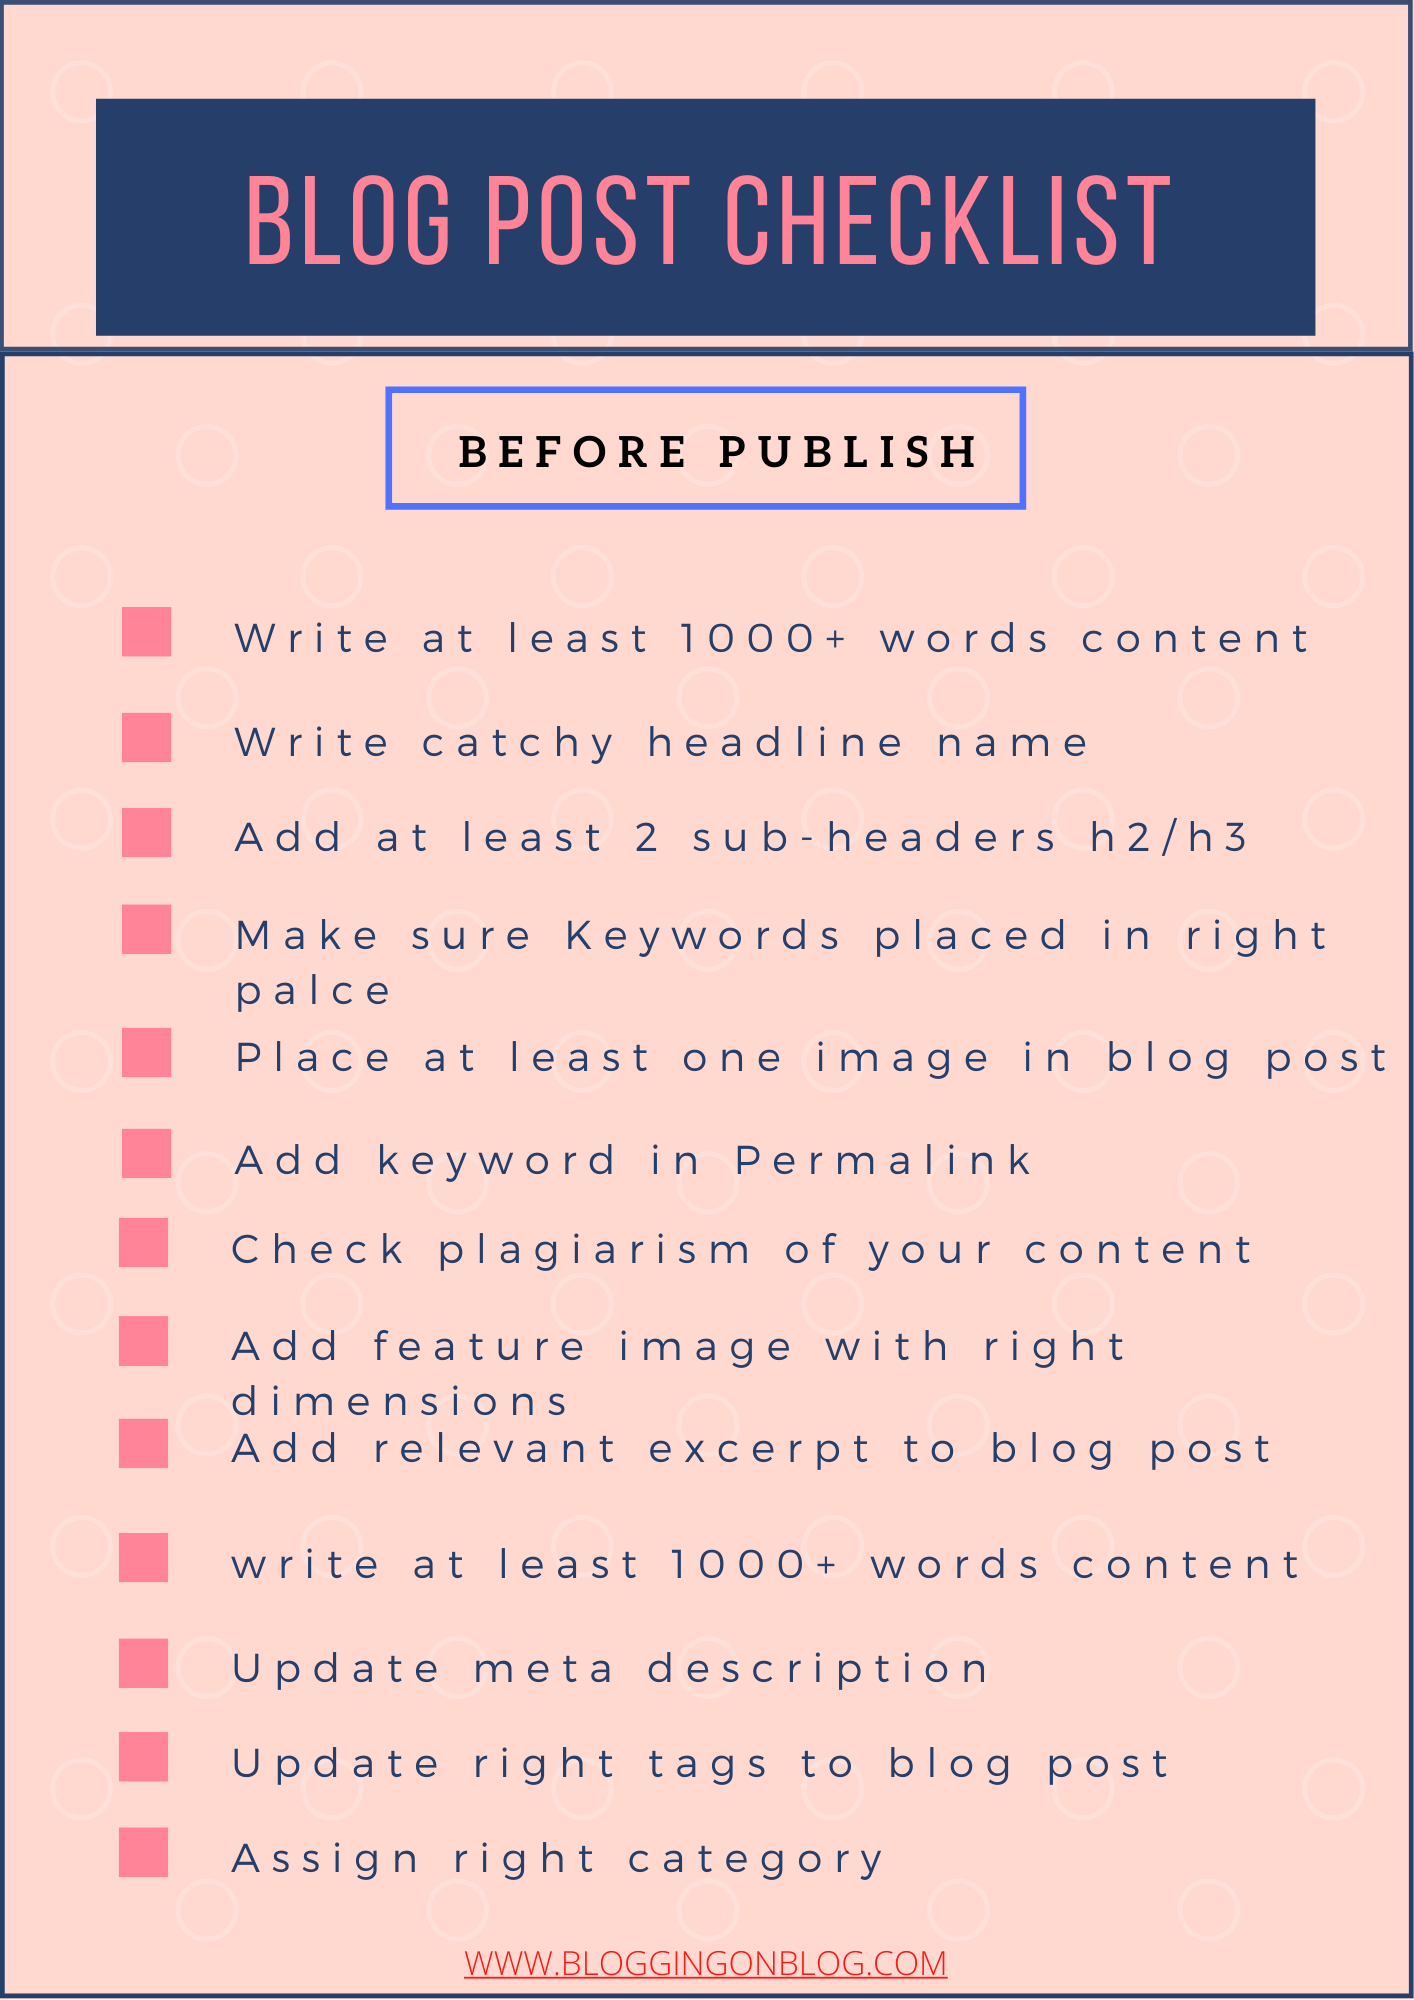 Blog post checklist to apply before publish